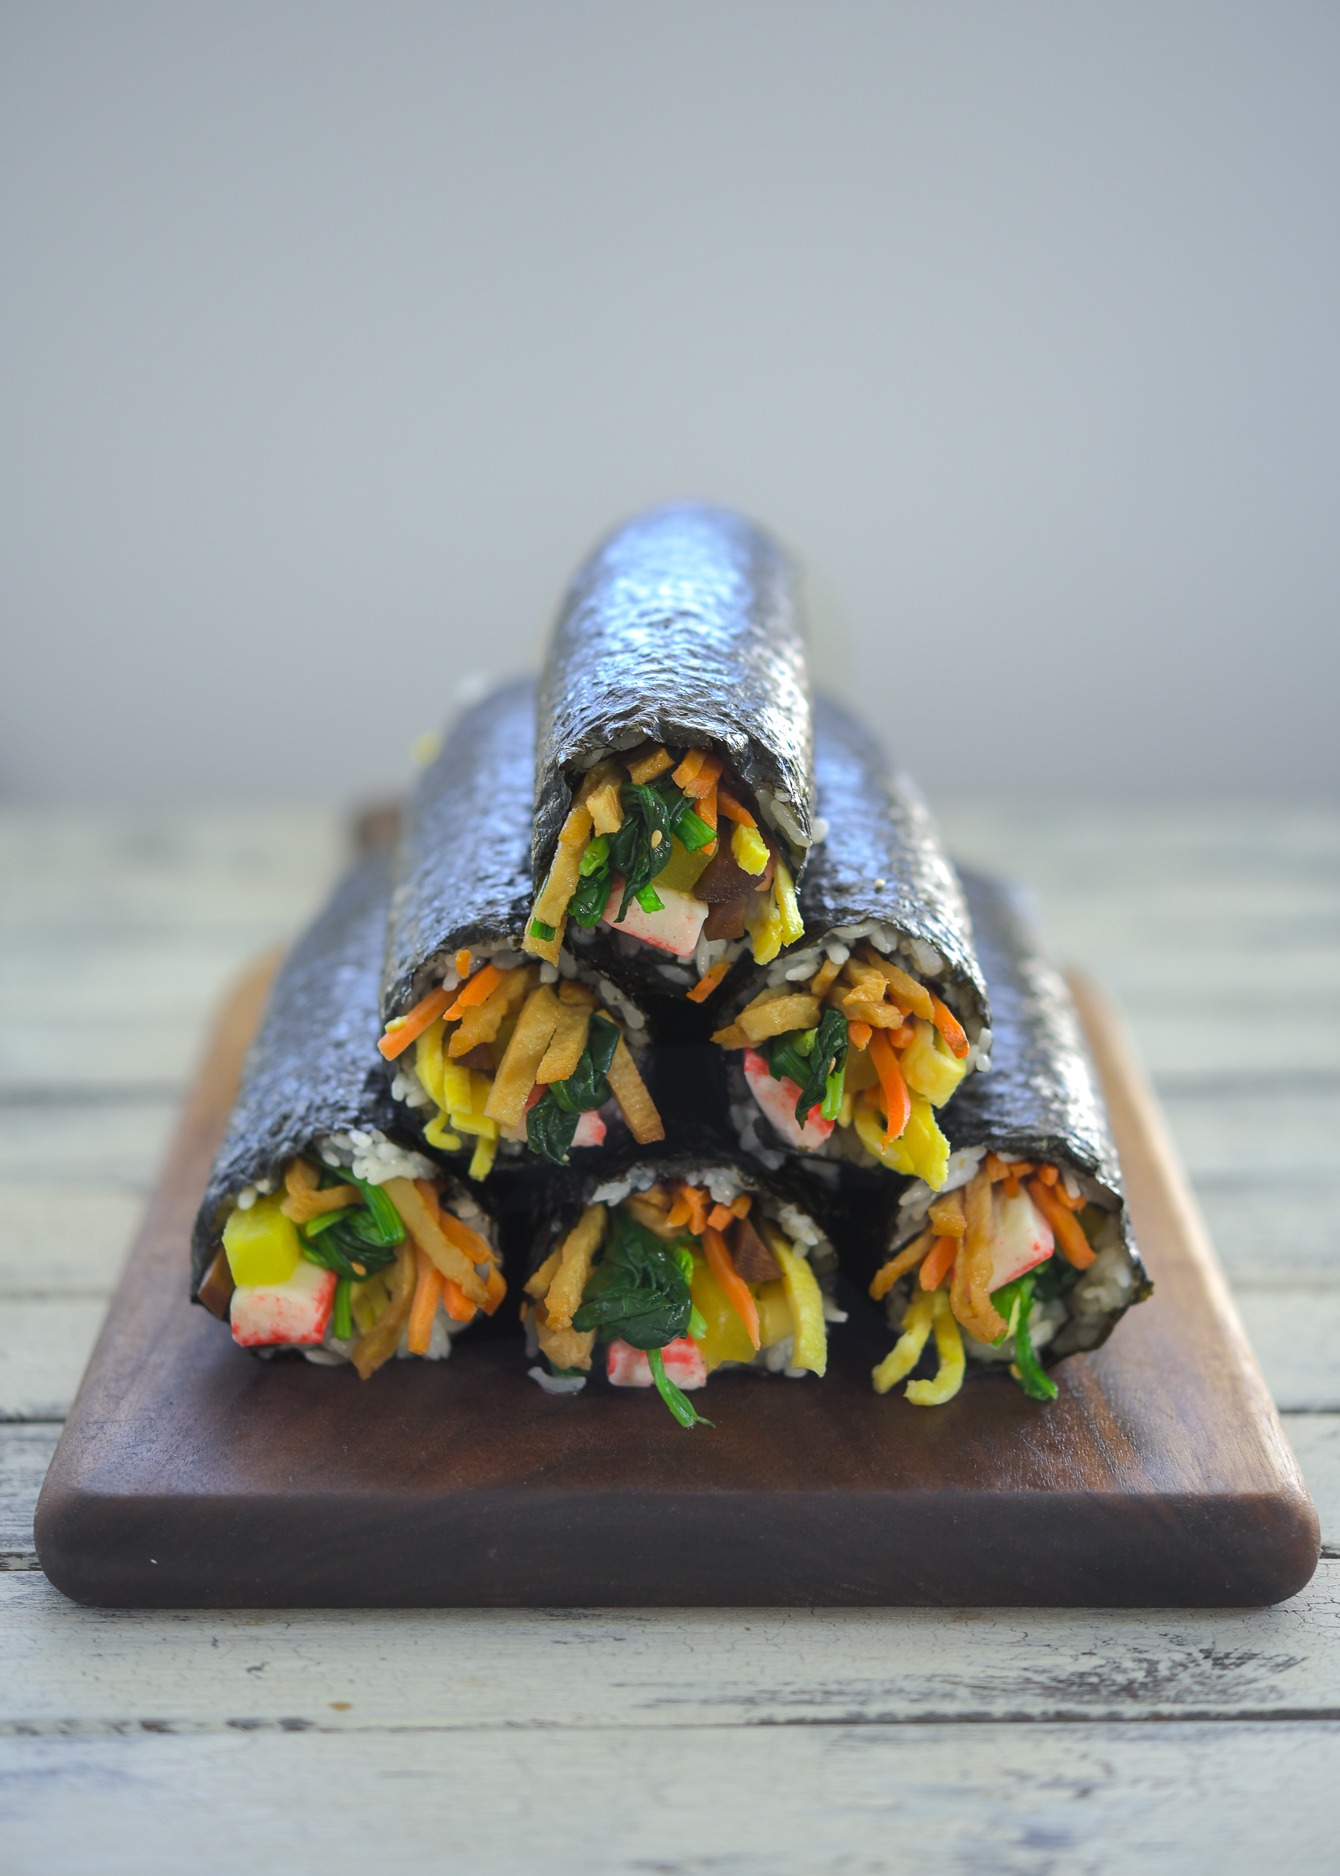 Korean seaweed rolls are stacked together on a wooden board.